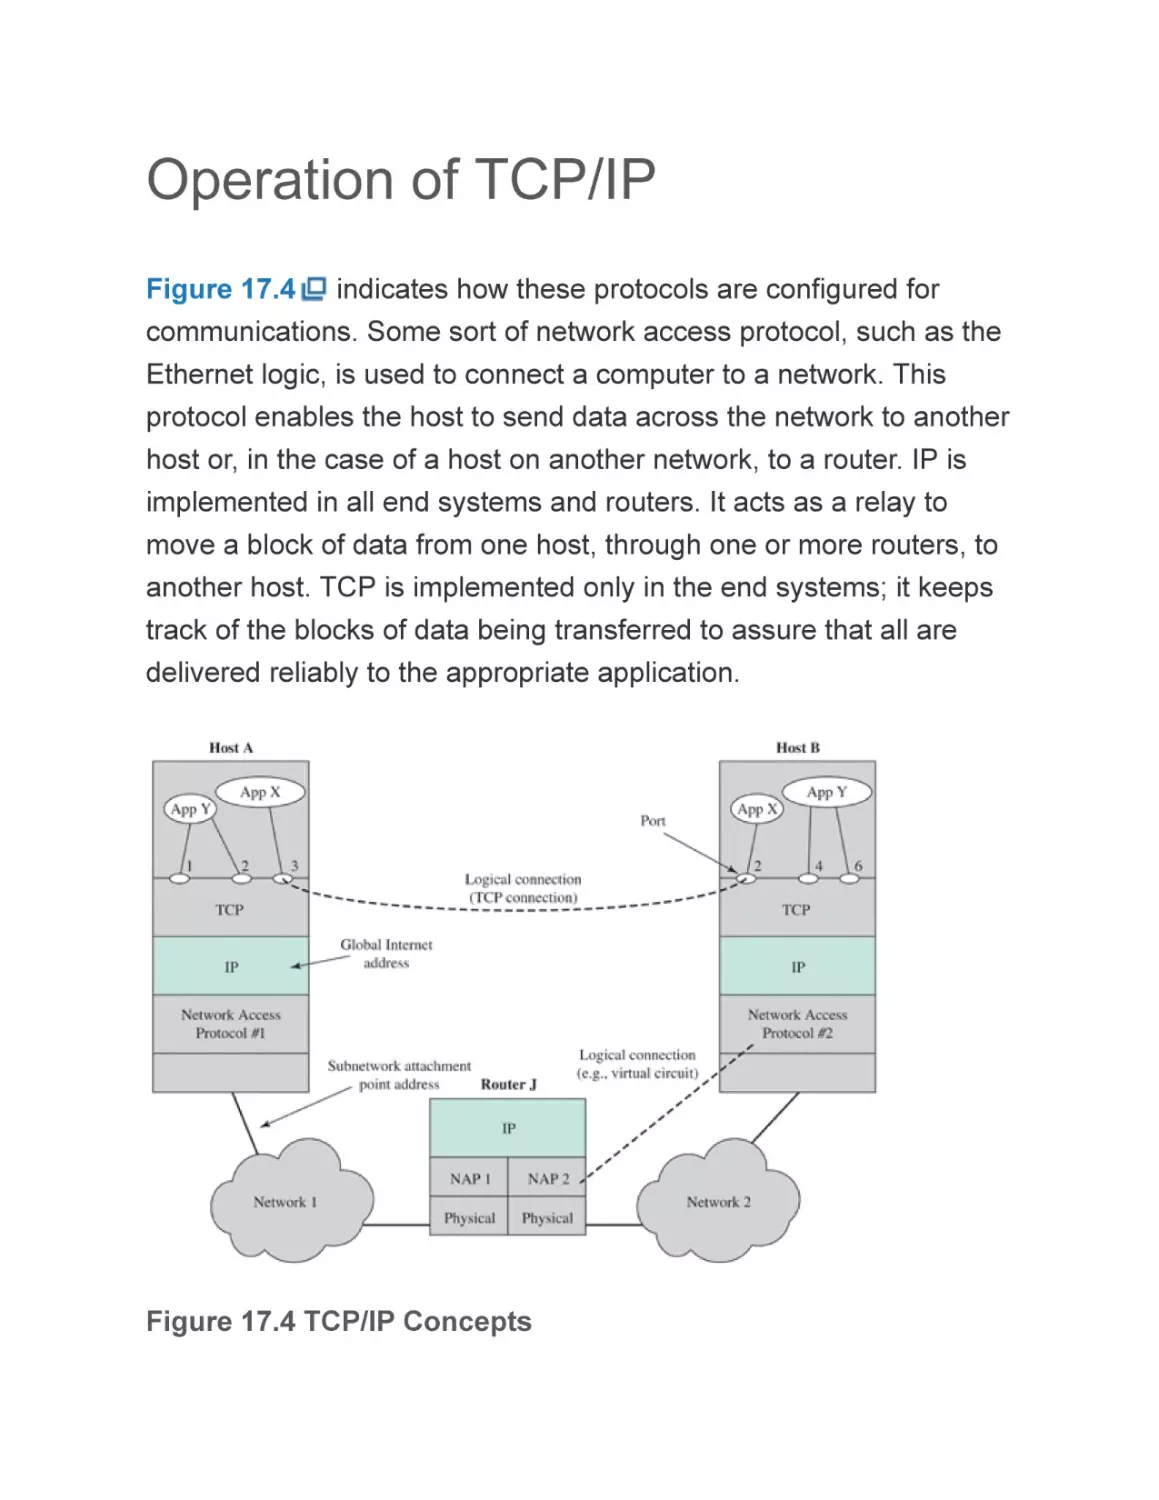 Operation of TCP/IP